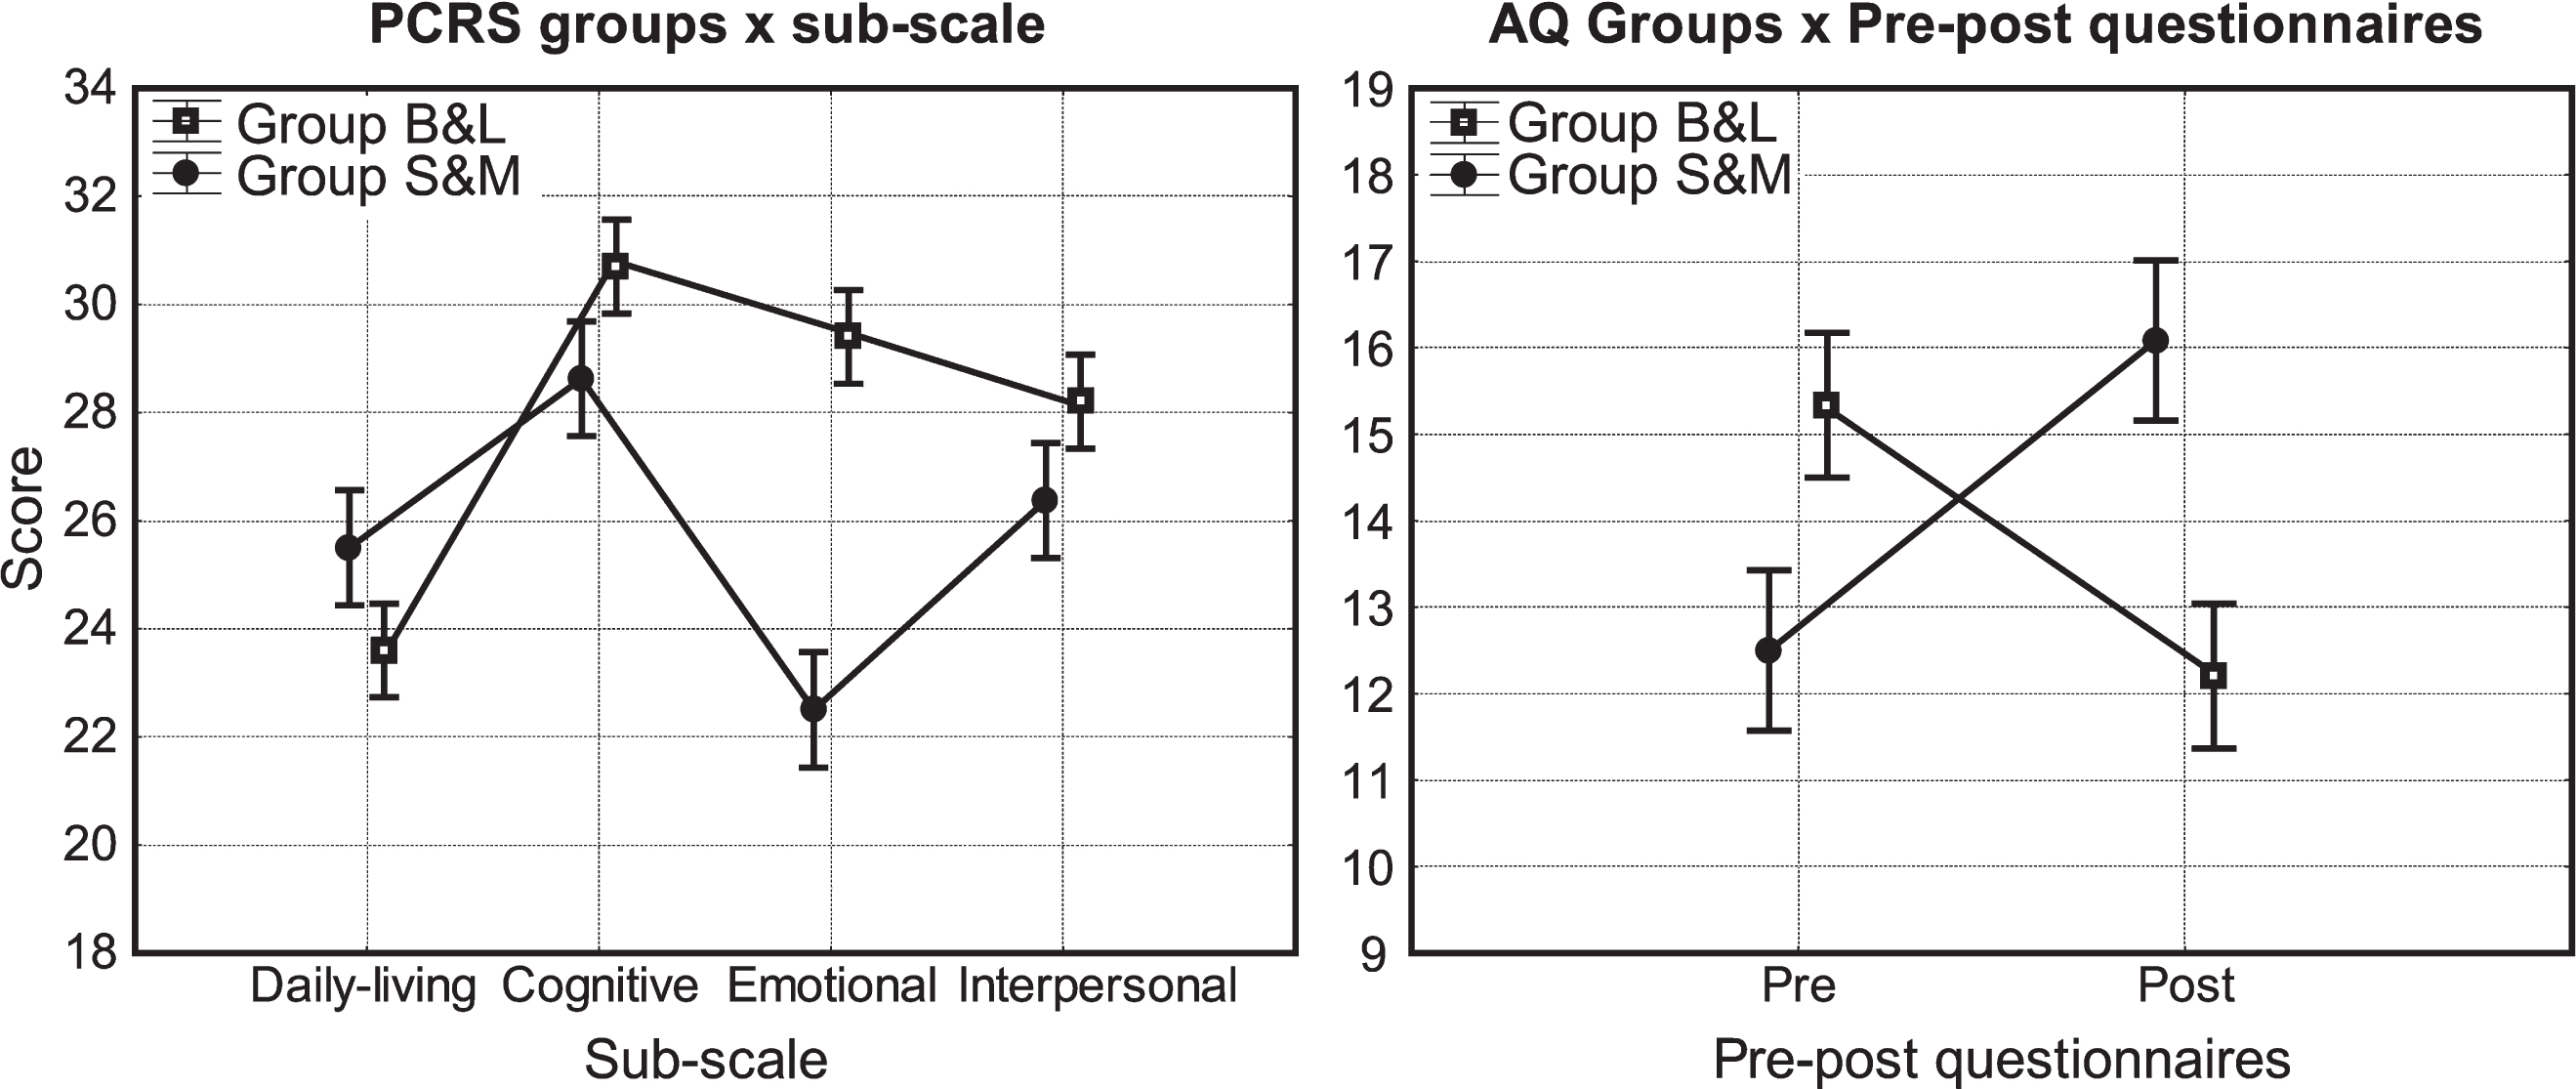 Awareness questionnaires. Graphical representation of the most important Table 2 significant results. The vertical bars represent +/–standard error. On the left: significant interaction effect of “Groups” and “sub-scale” in PCRS. The most relevant difference between B&L Group and S&M Group is for “emotional” subscale. On the right: significant interaction effect of Groups and pre-post questionnaires in AQ. In the pre-condition the score is higher for B&L Group; in post-condition is vice-versa.